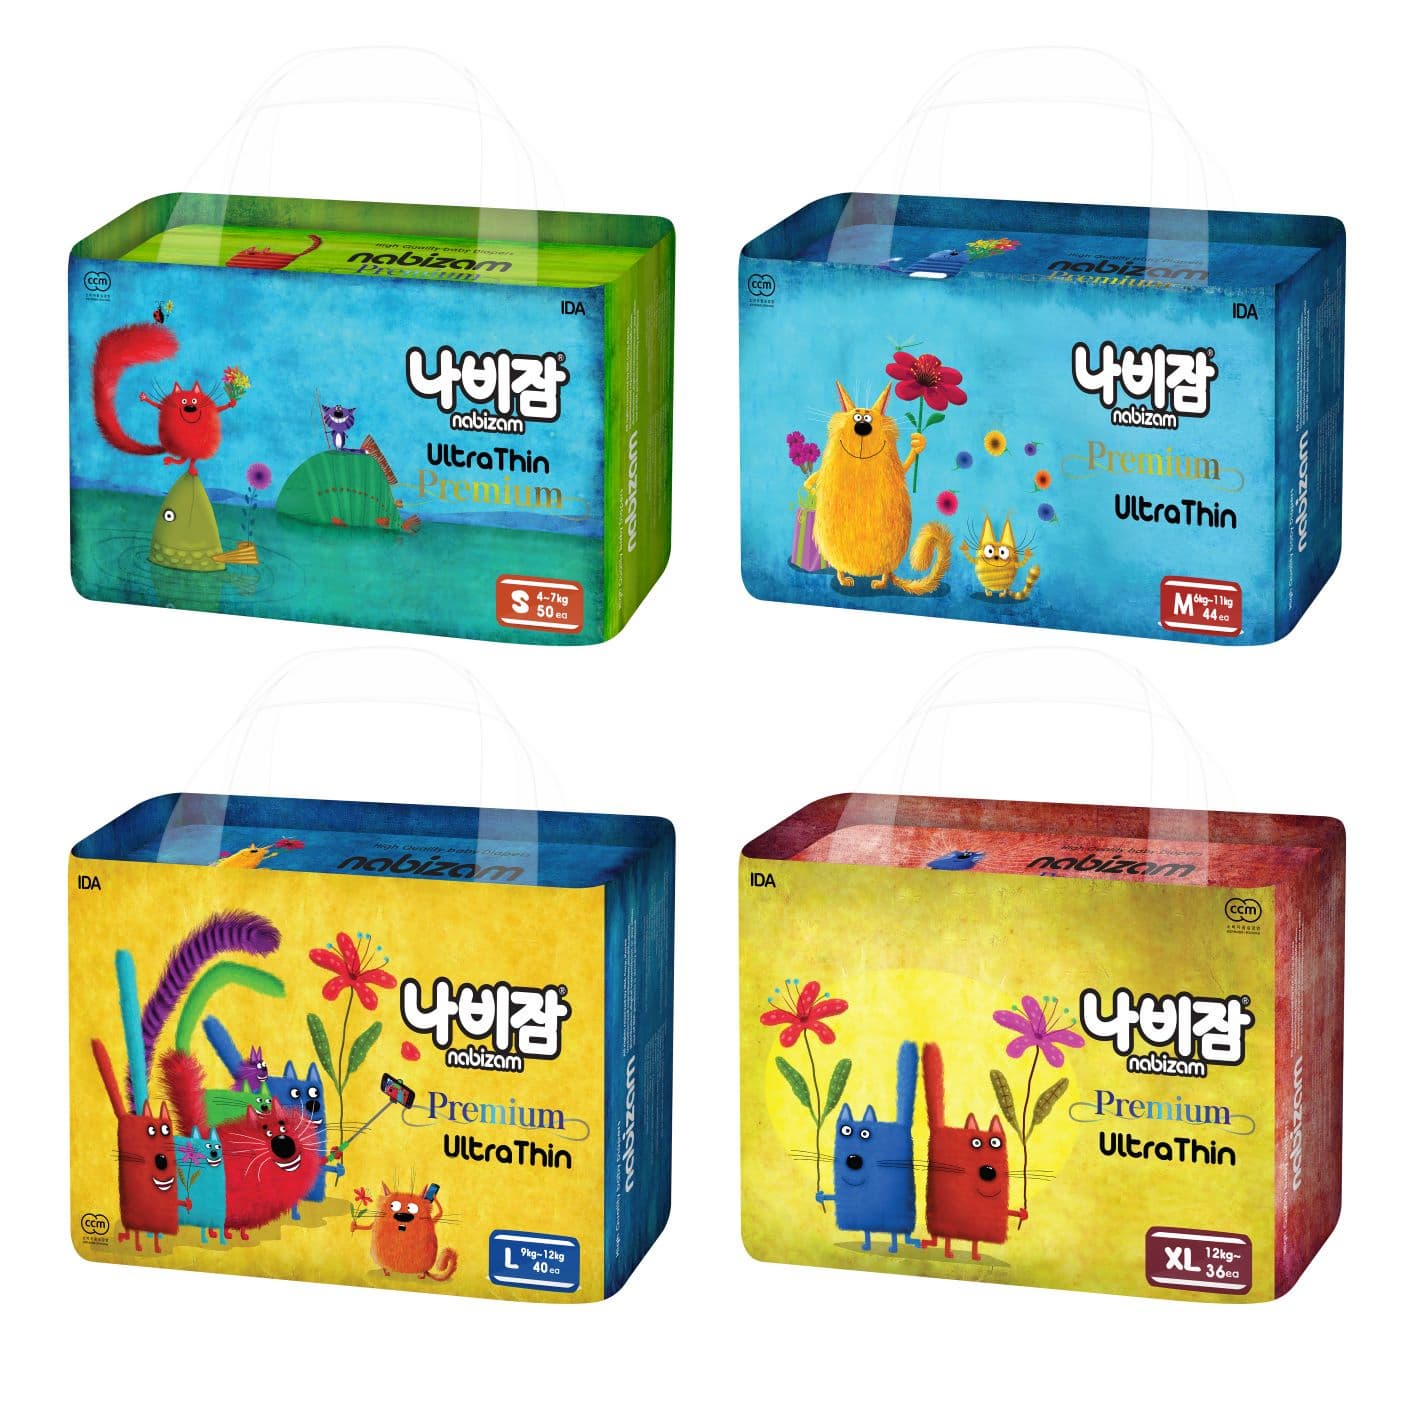 ULTRATHIN band baby diaper for Korea domestic use